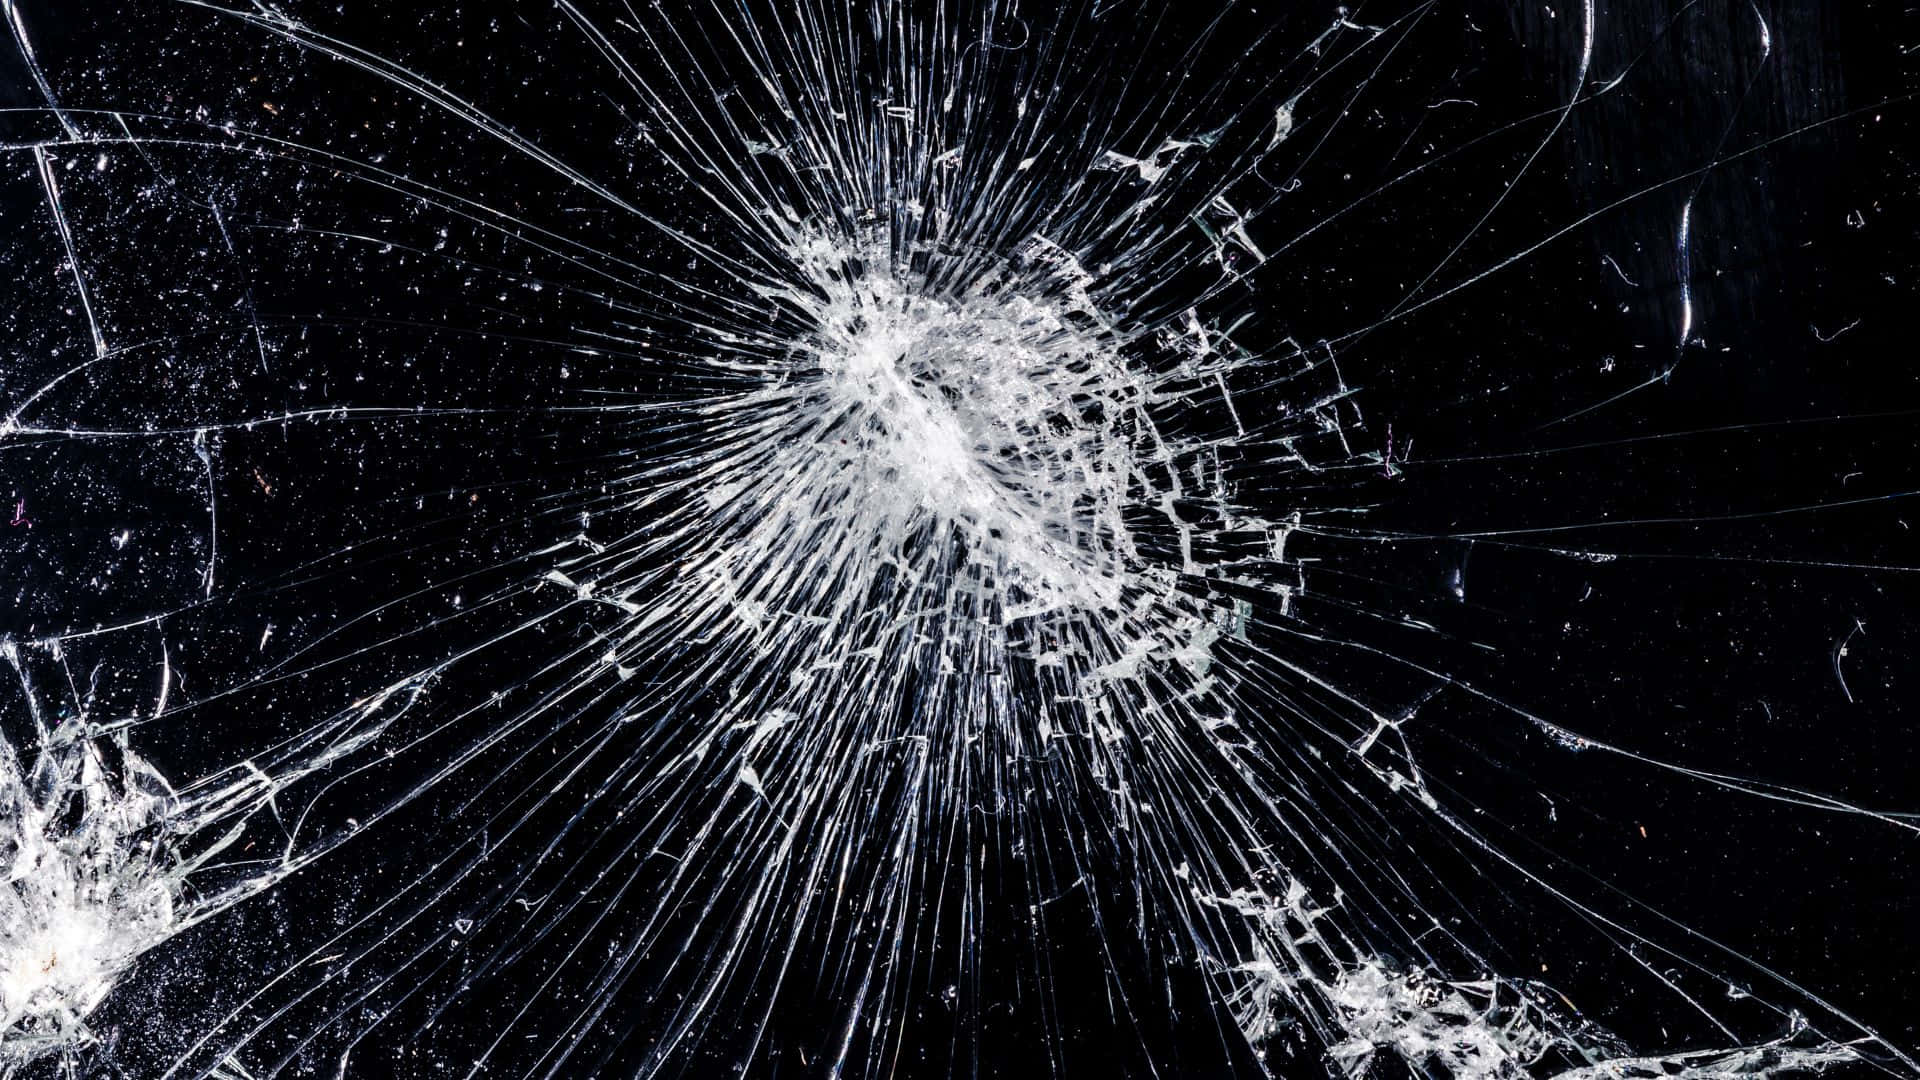 "A Shattered Smartphone Screen"